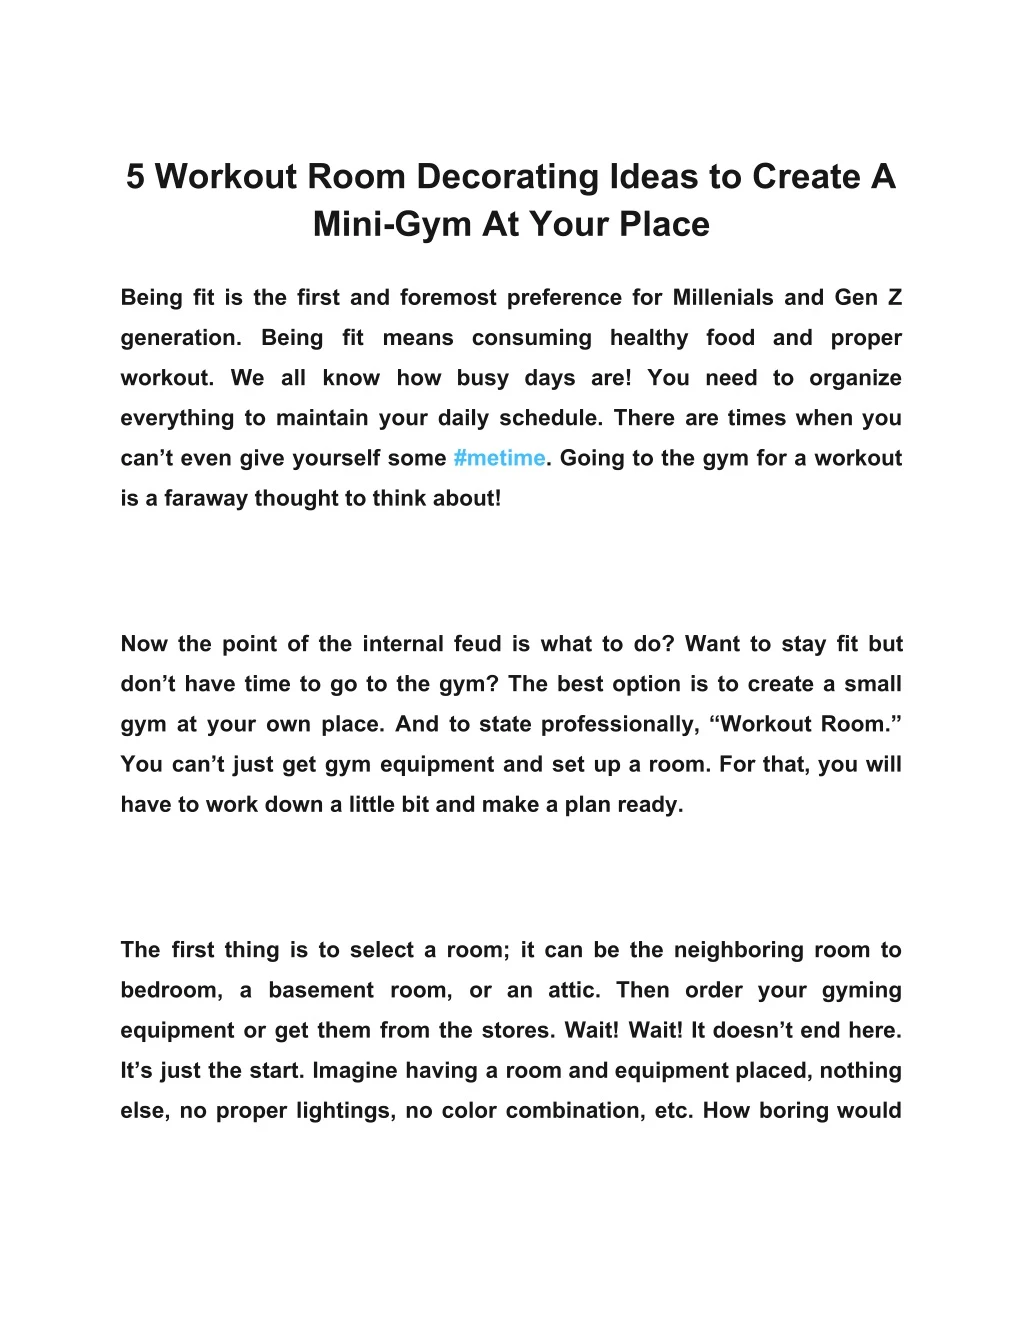 5 workout room decorating ideas to create a mini